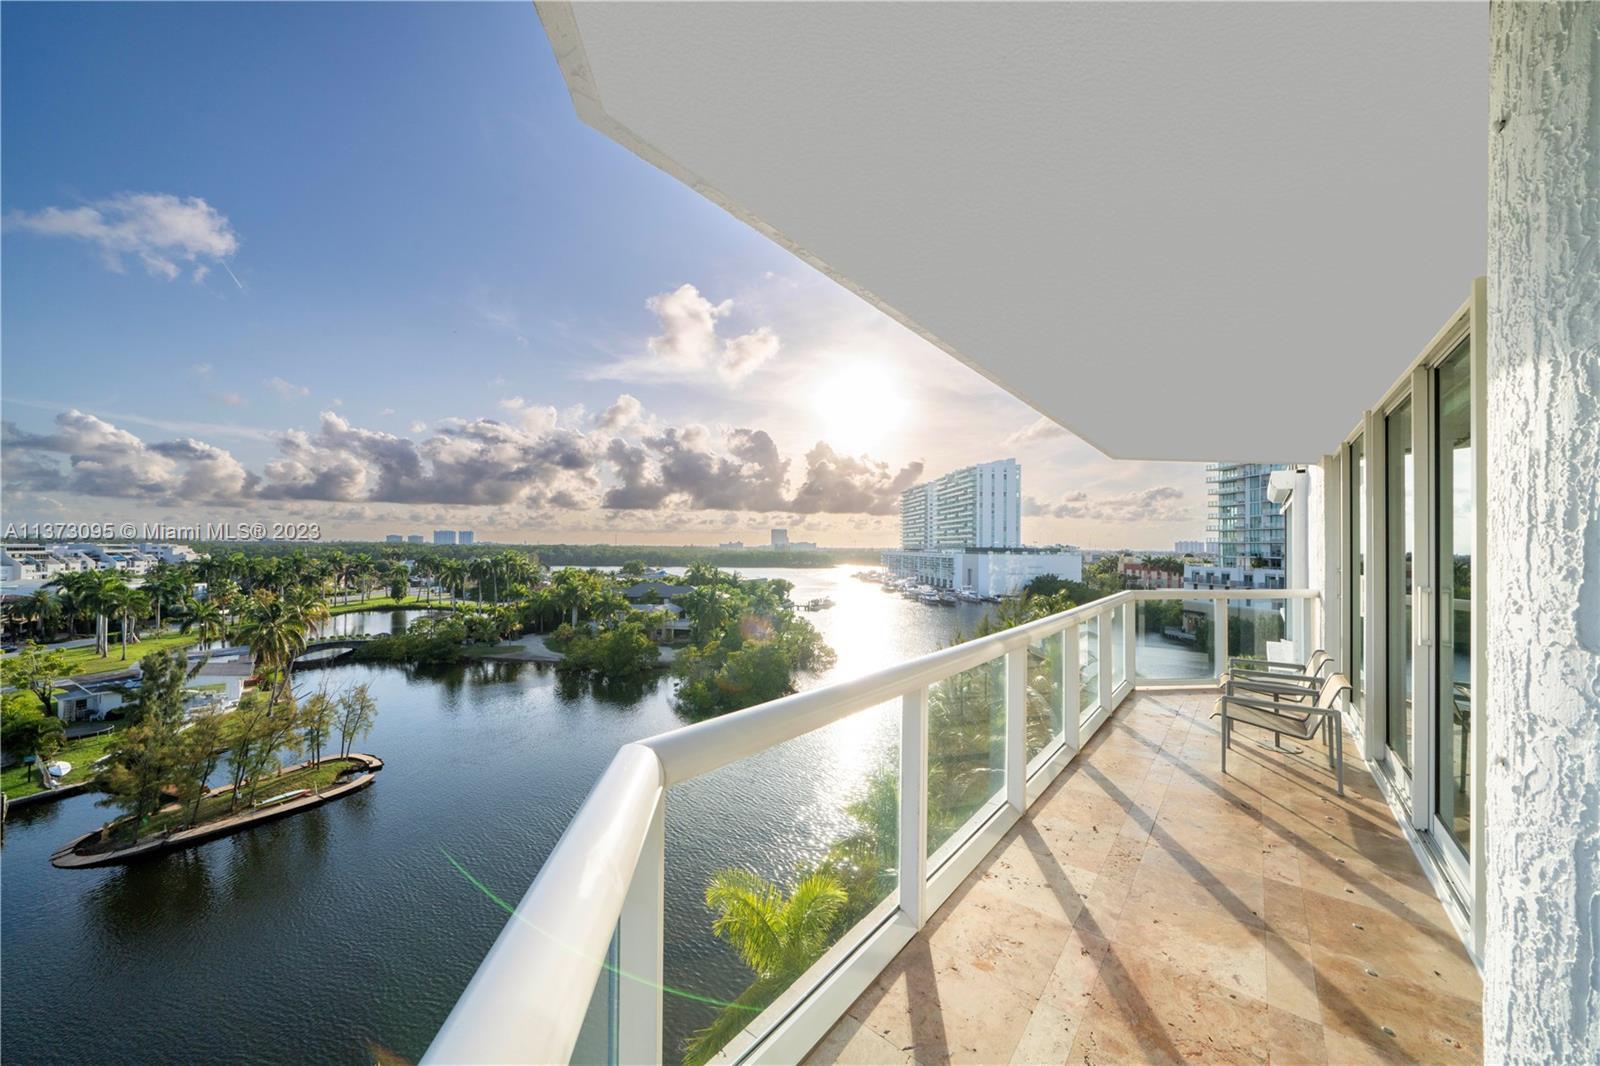 Walk to Haulover Beach! Best price per Sq.Ft. in Oceania V! Rare & spacious 3BD/3.5BA townhouse in t